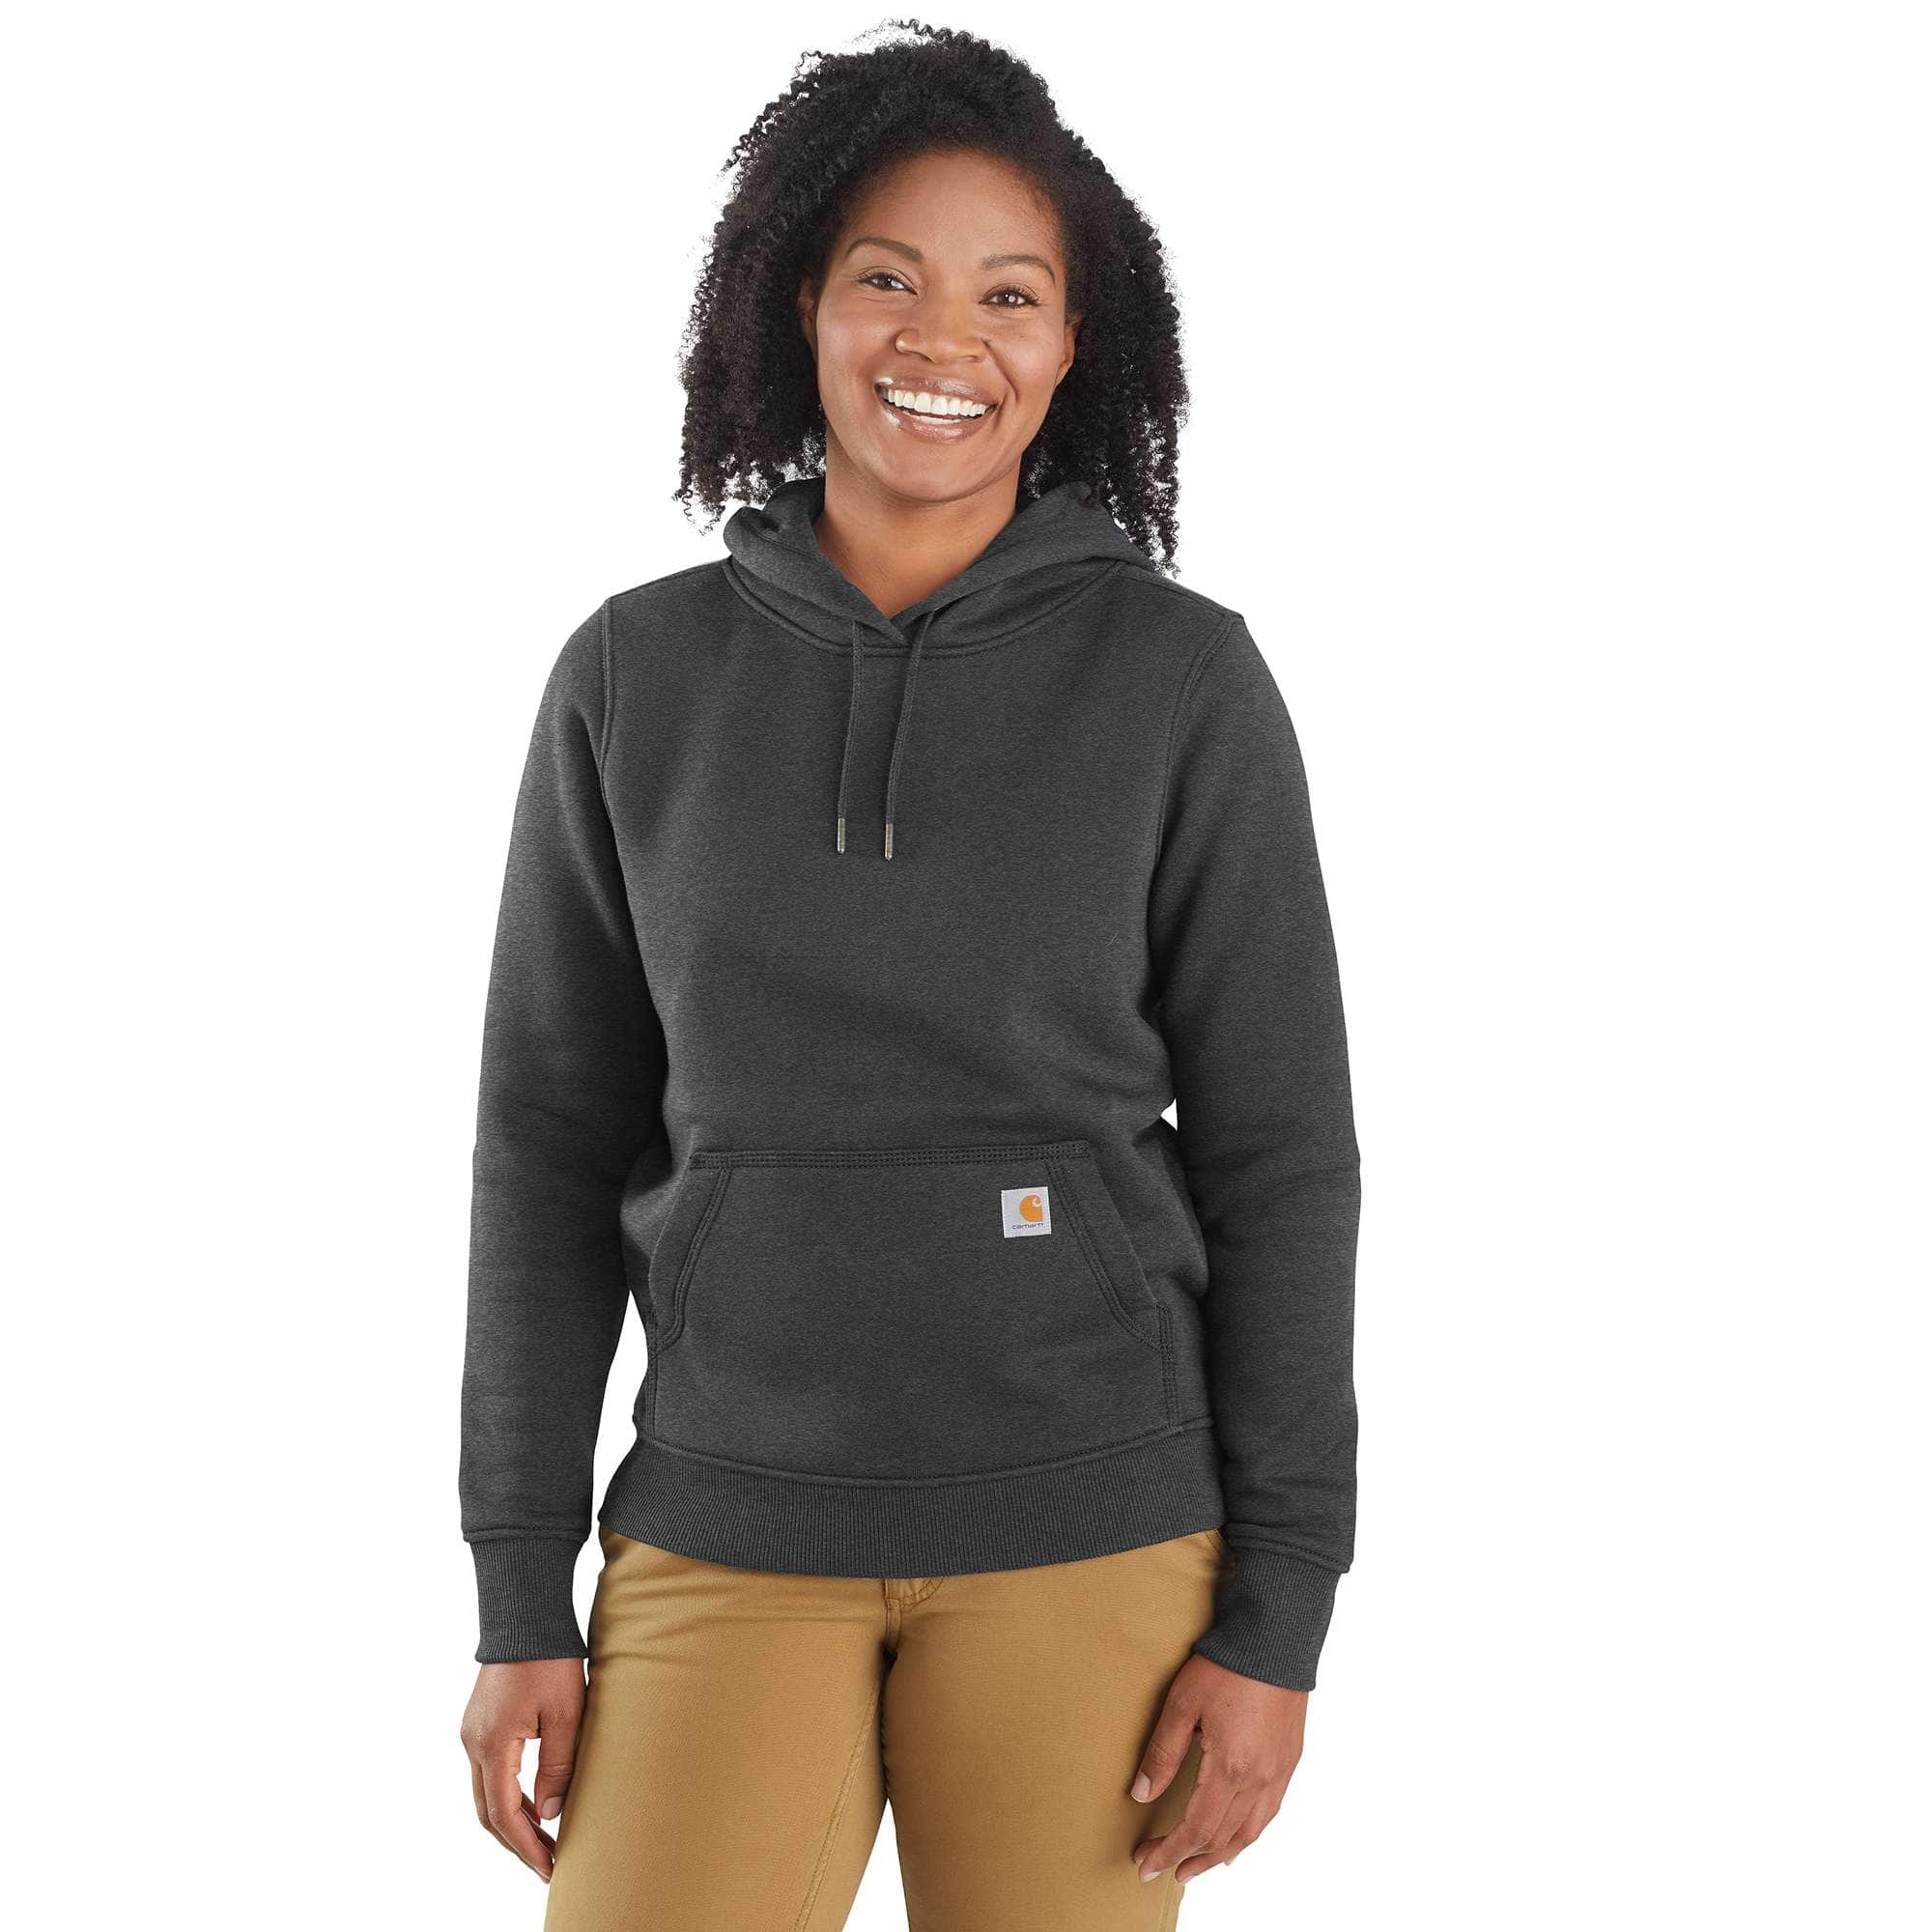 Closeout - Carhartt Rain Defender Rutland Thermal-Lined Hooded Zip-Fro